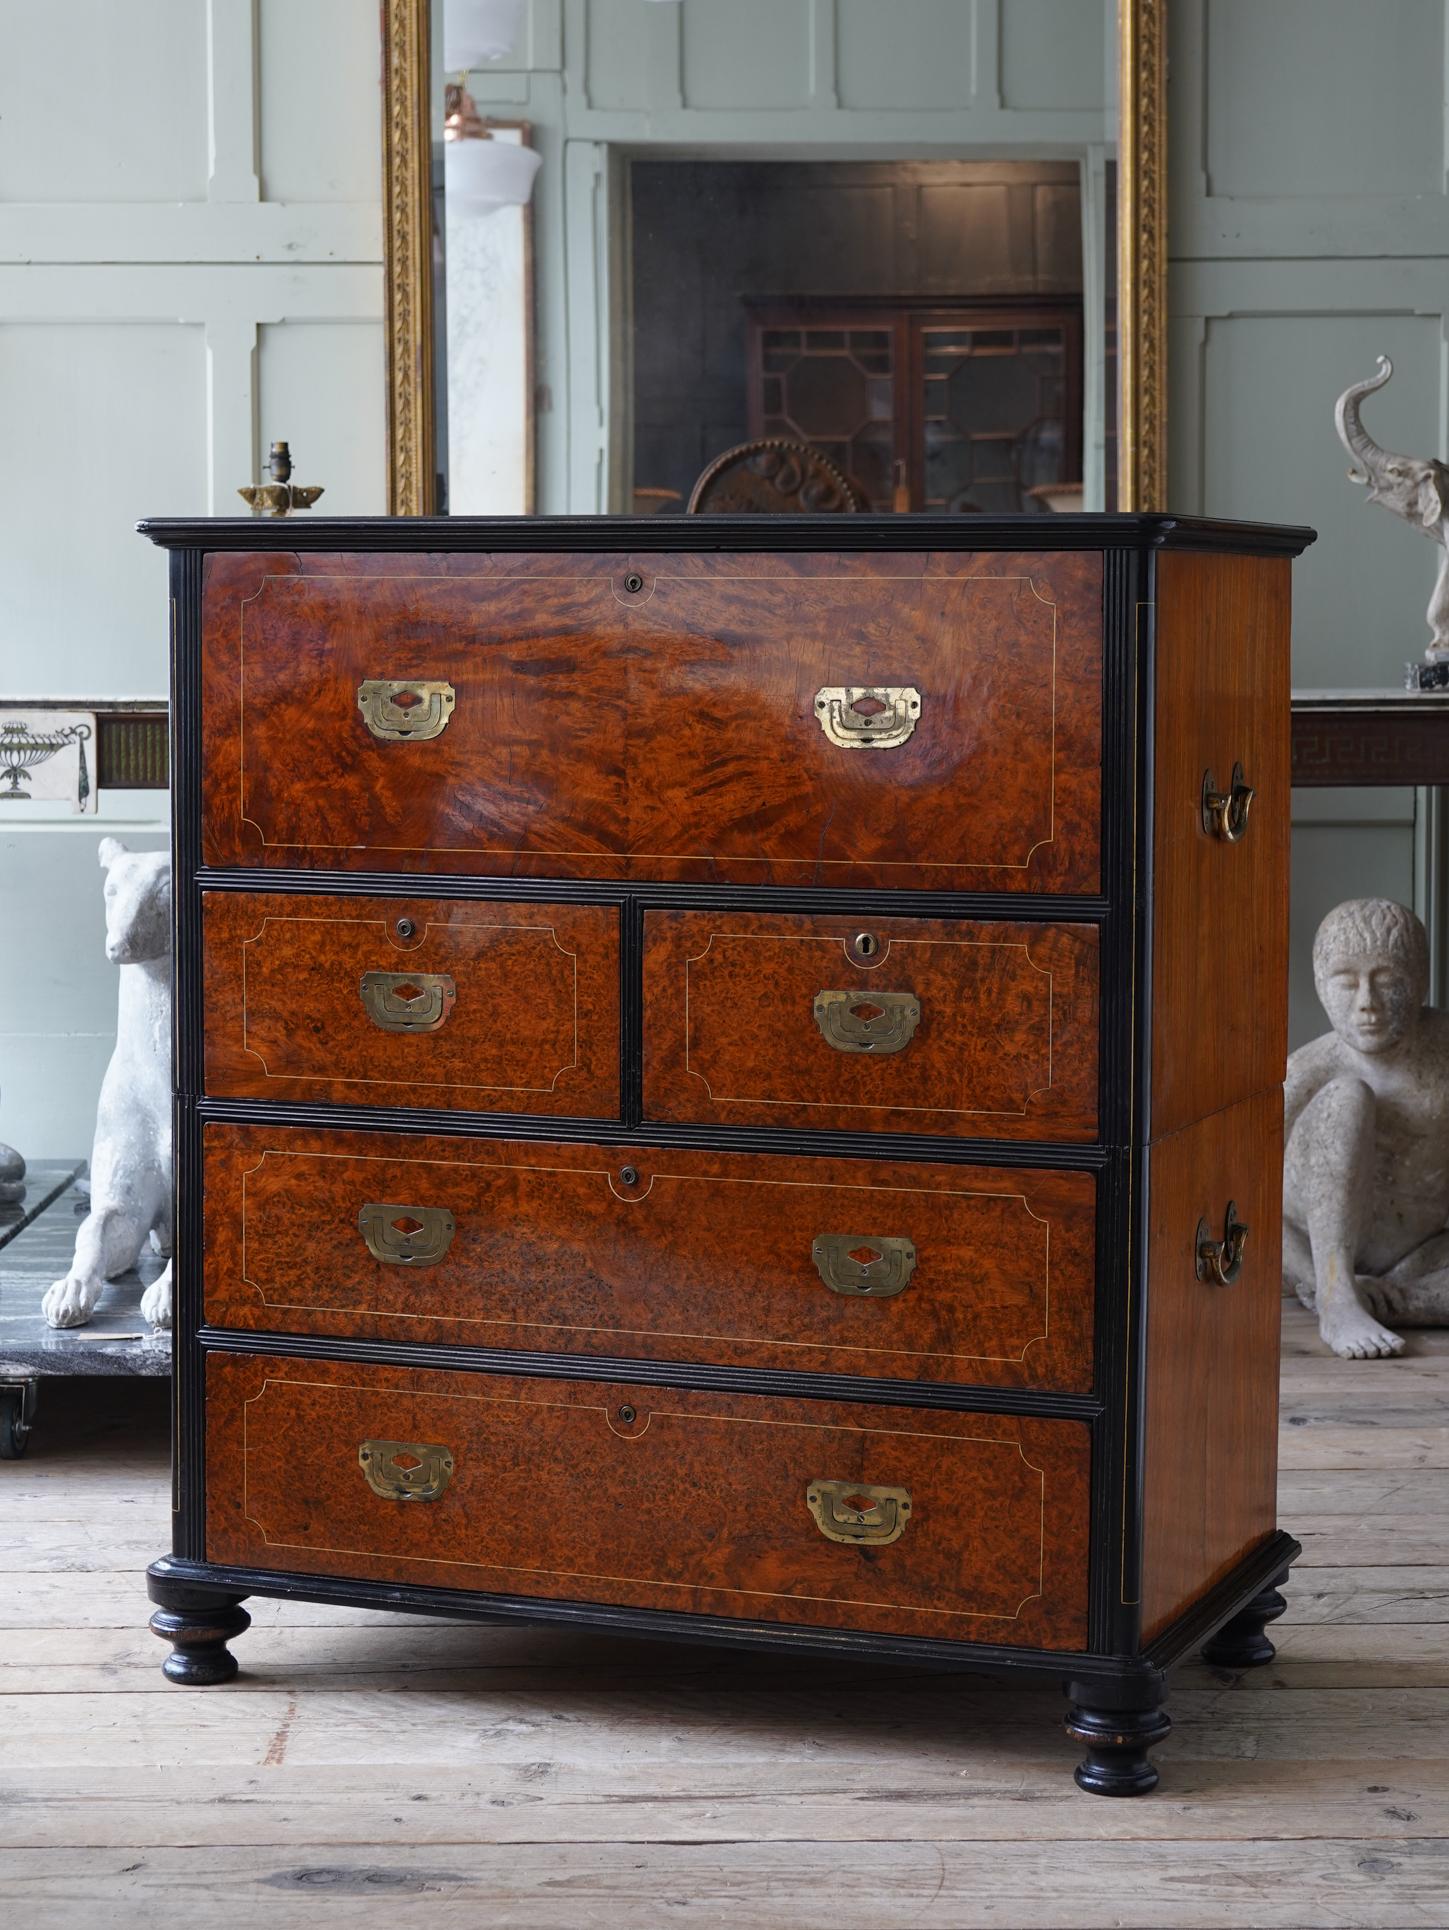 A mid-19th century China trade amboyna veneered camphor wood secretaire campaign chest.

The chest has an ebony reeded frame and bun feet, constructed in two parts with brass carrying handles to both sections. The drawer fronts have flush gilt